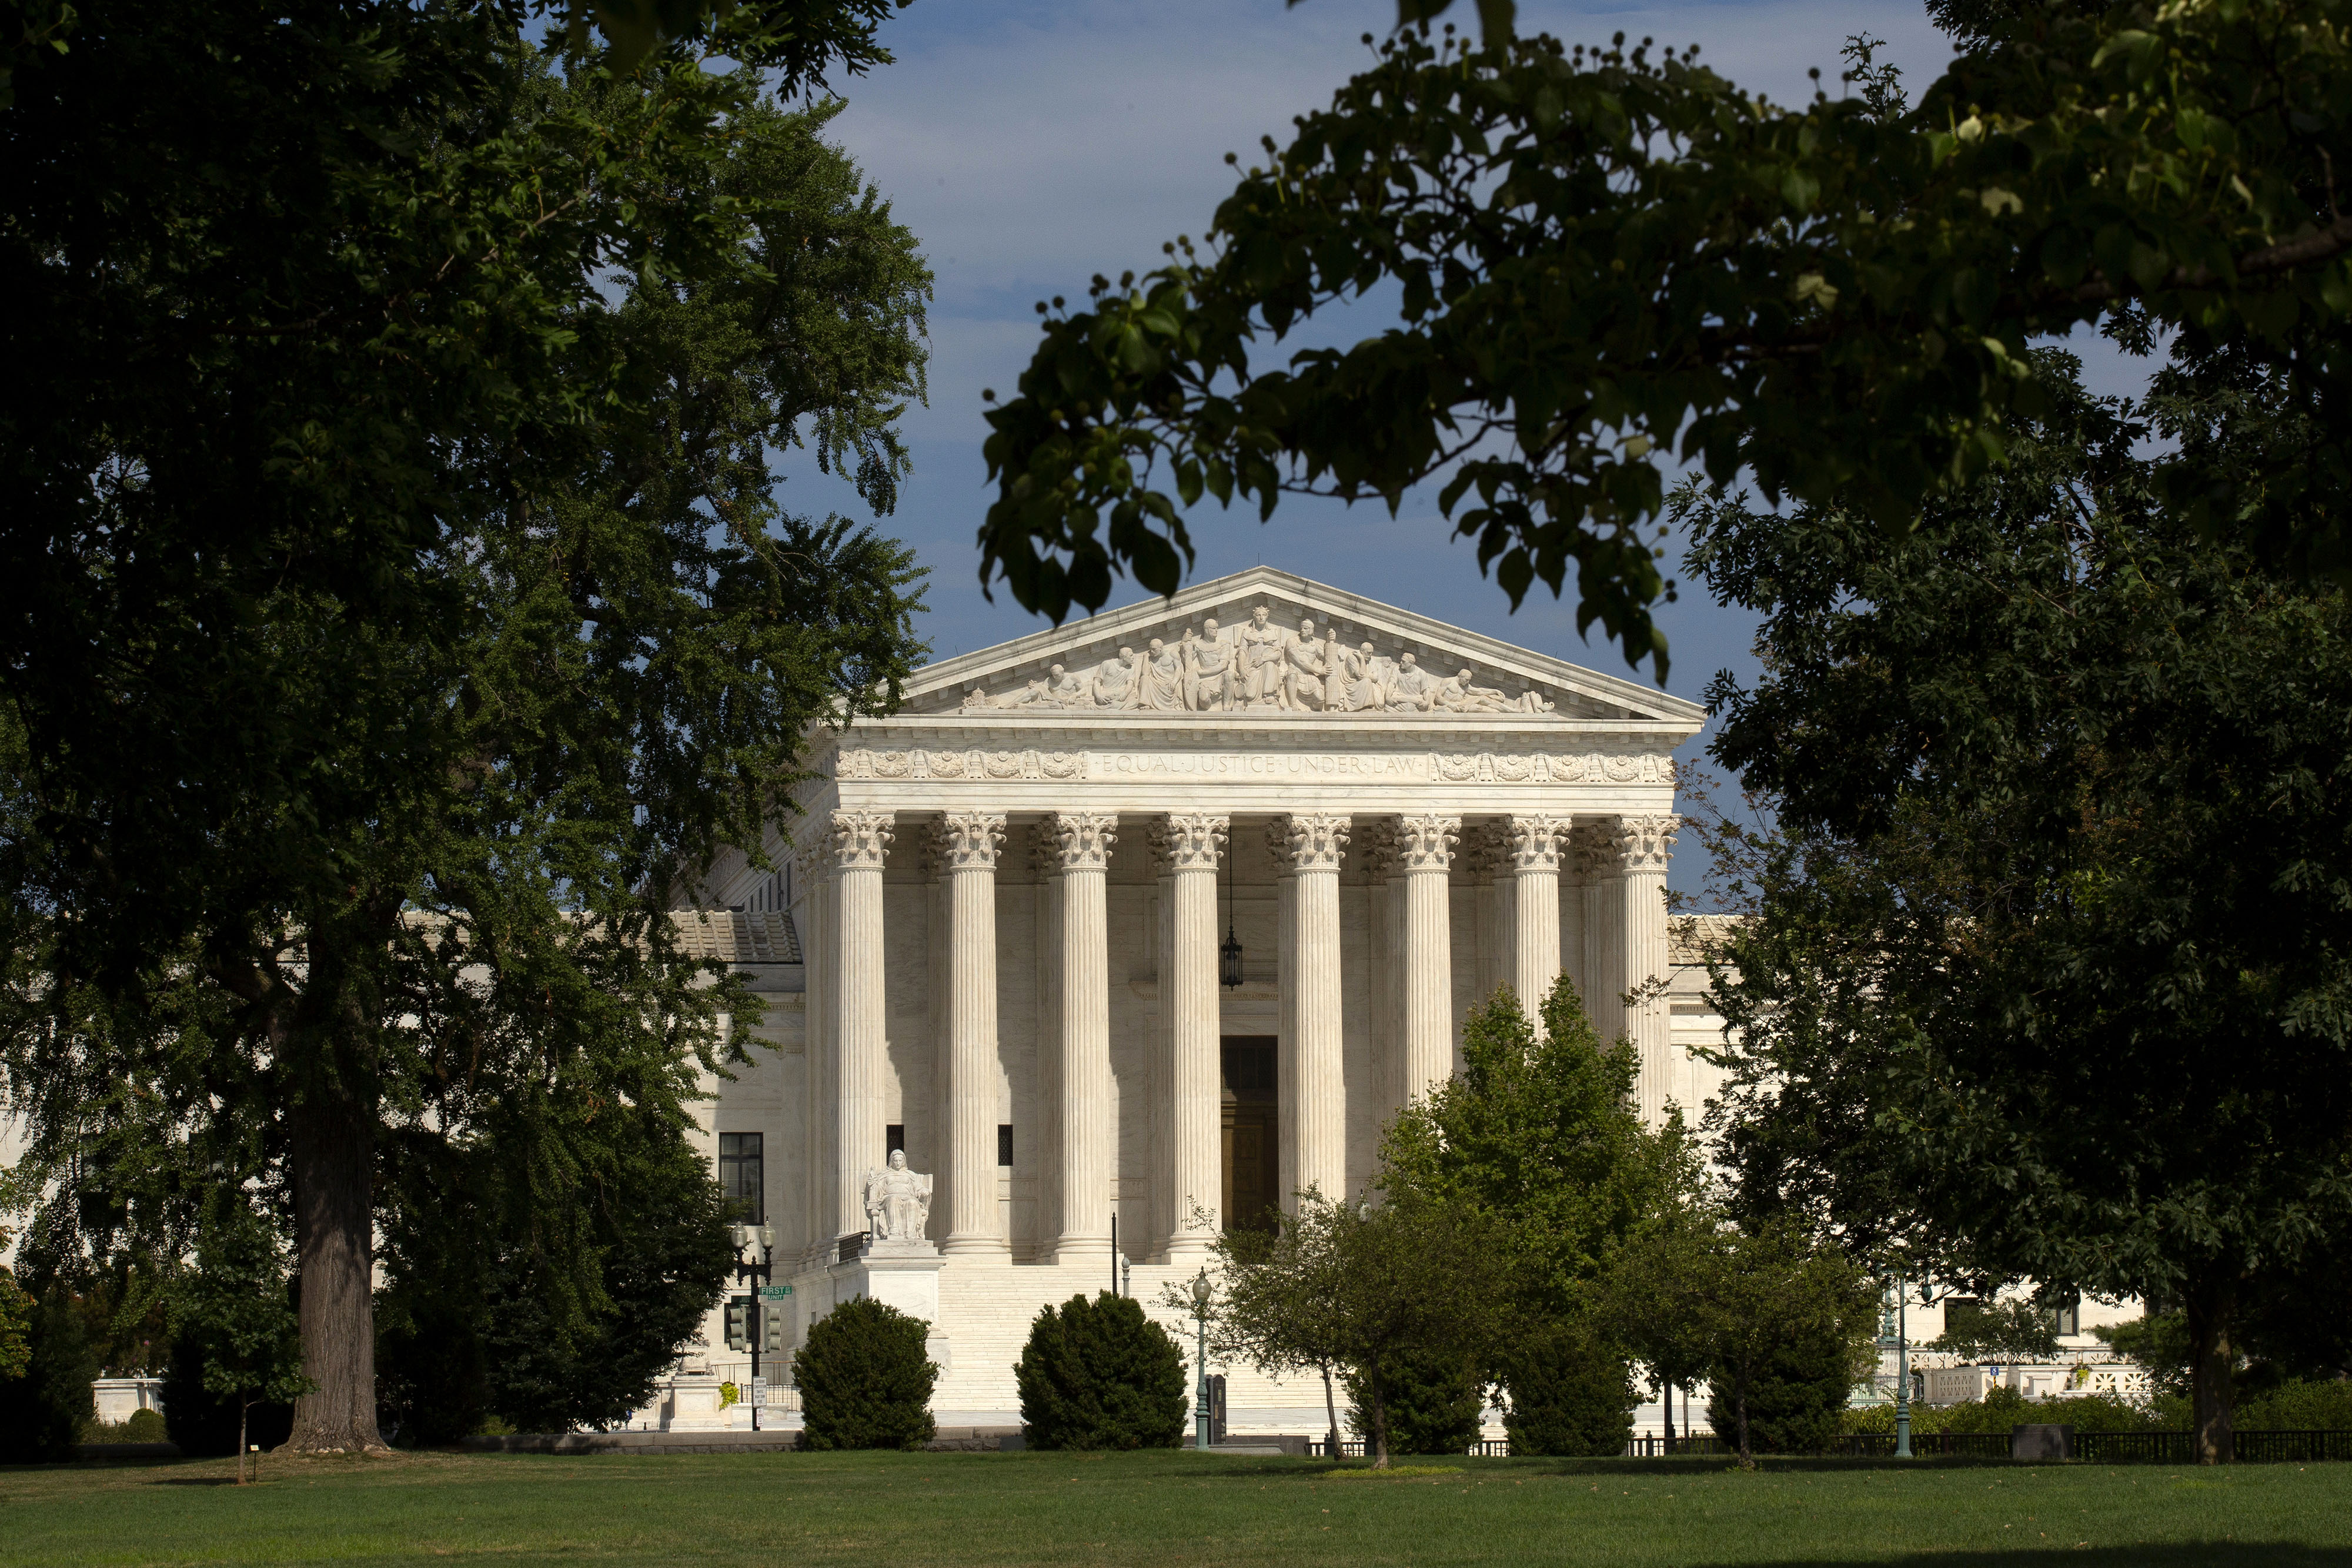 The Supreme Court in Washington, DC, on July 20.